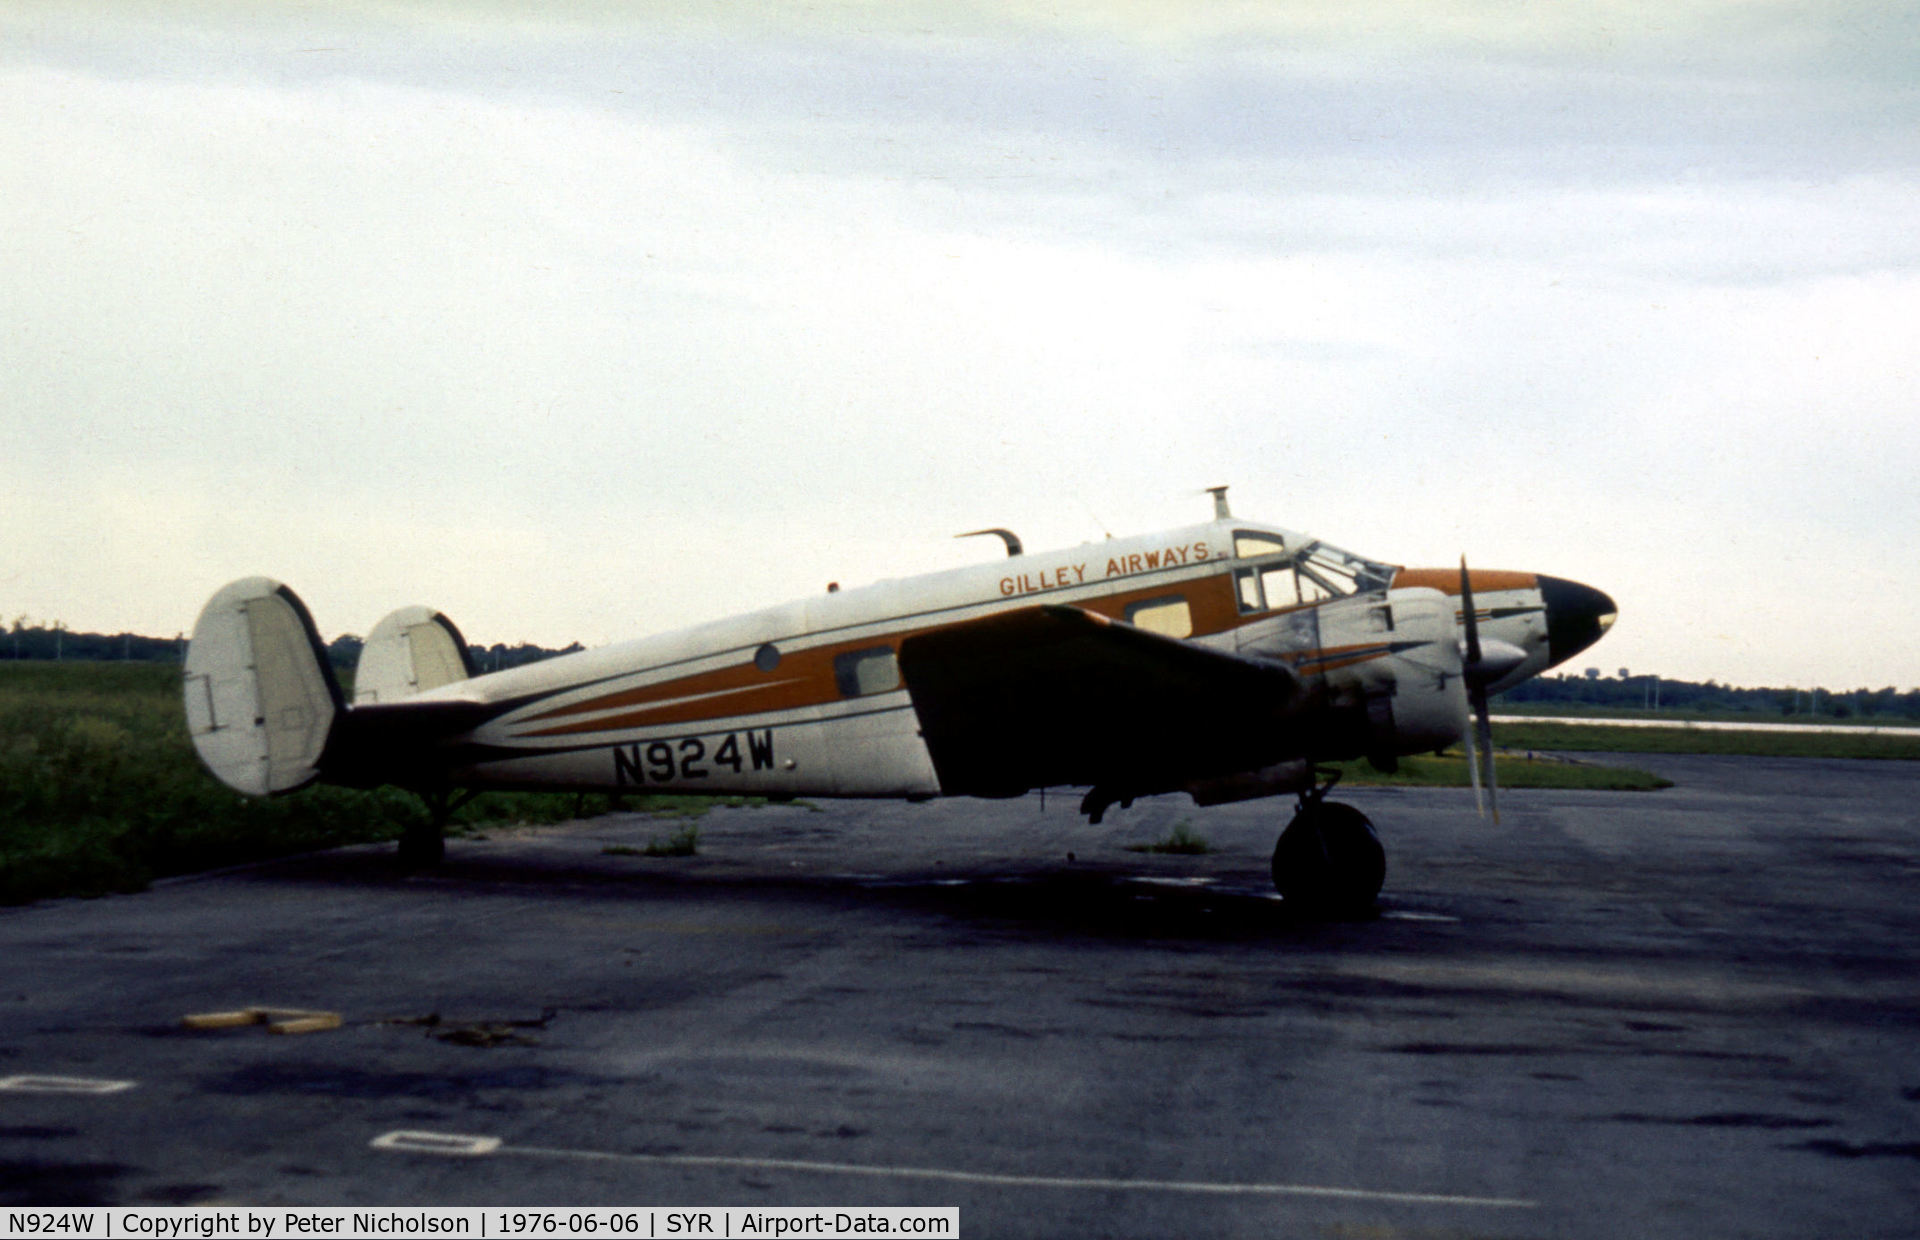 N924W, Beech E18S C/N BA-53, Beech E18S of Gilley Airways as seen at Syracuse in the Summer of 1976.